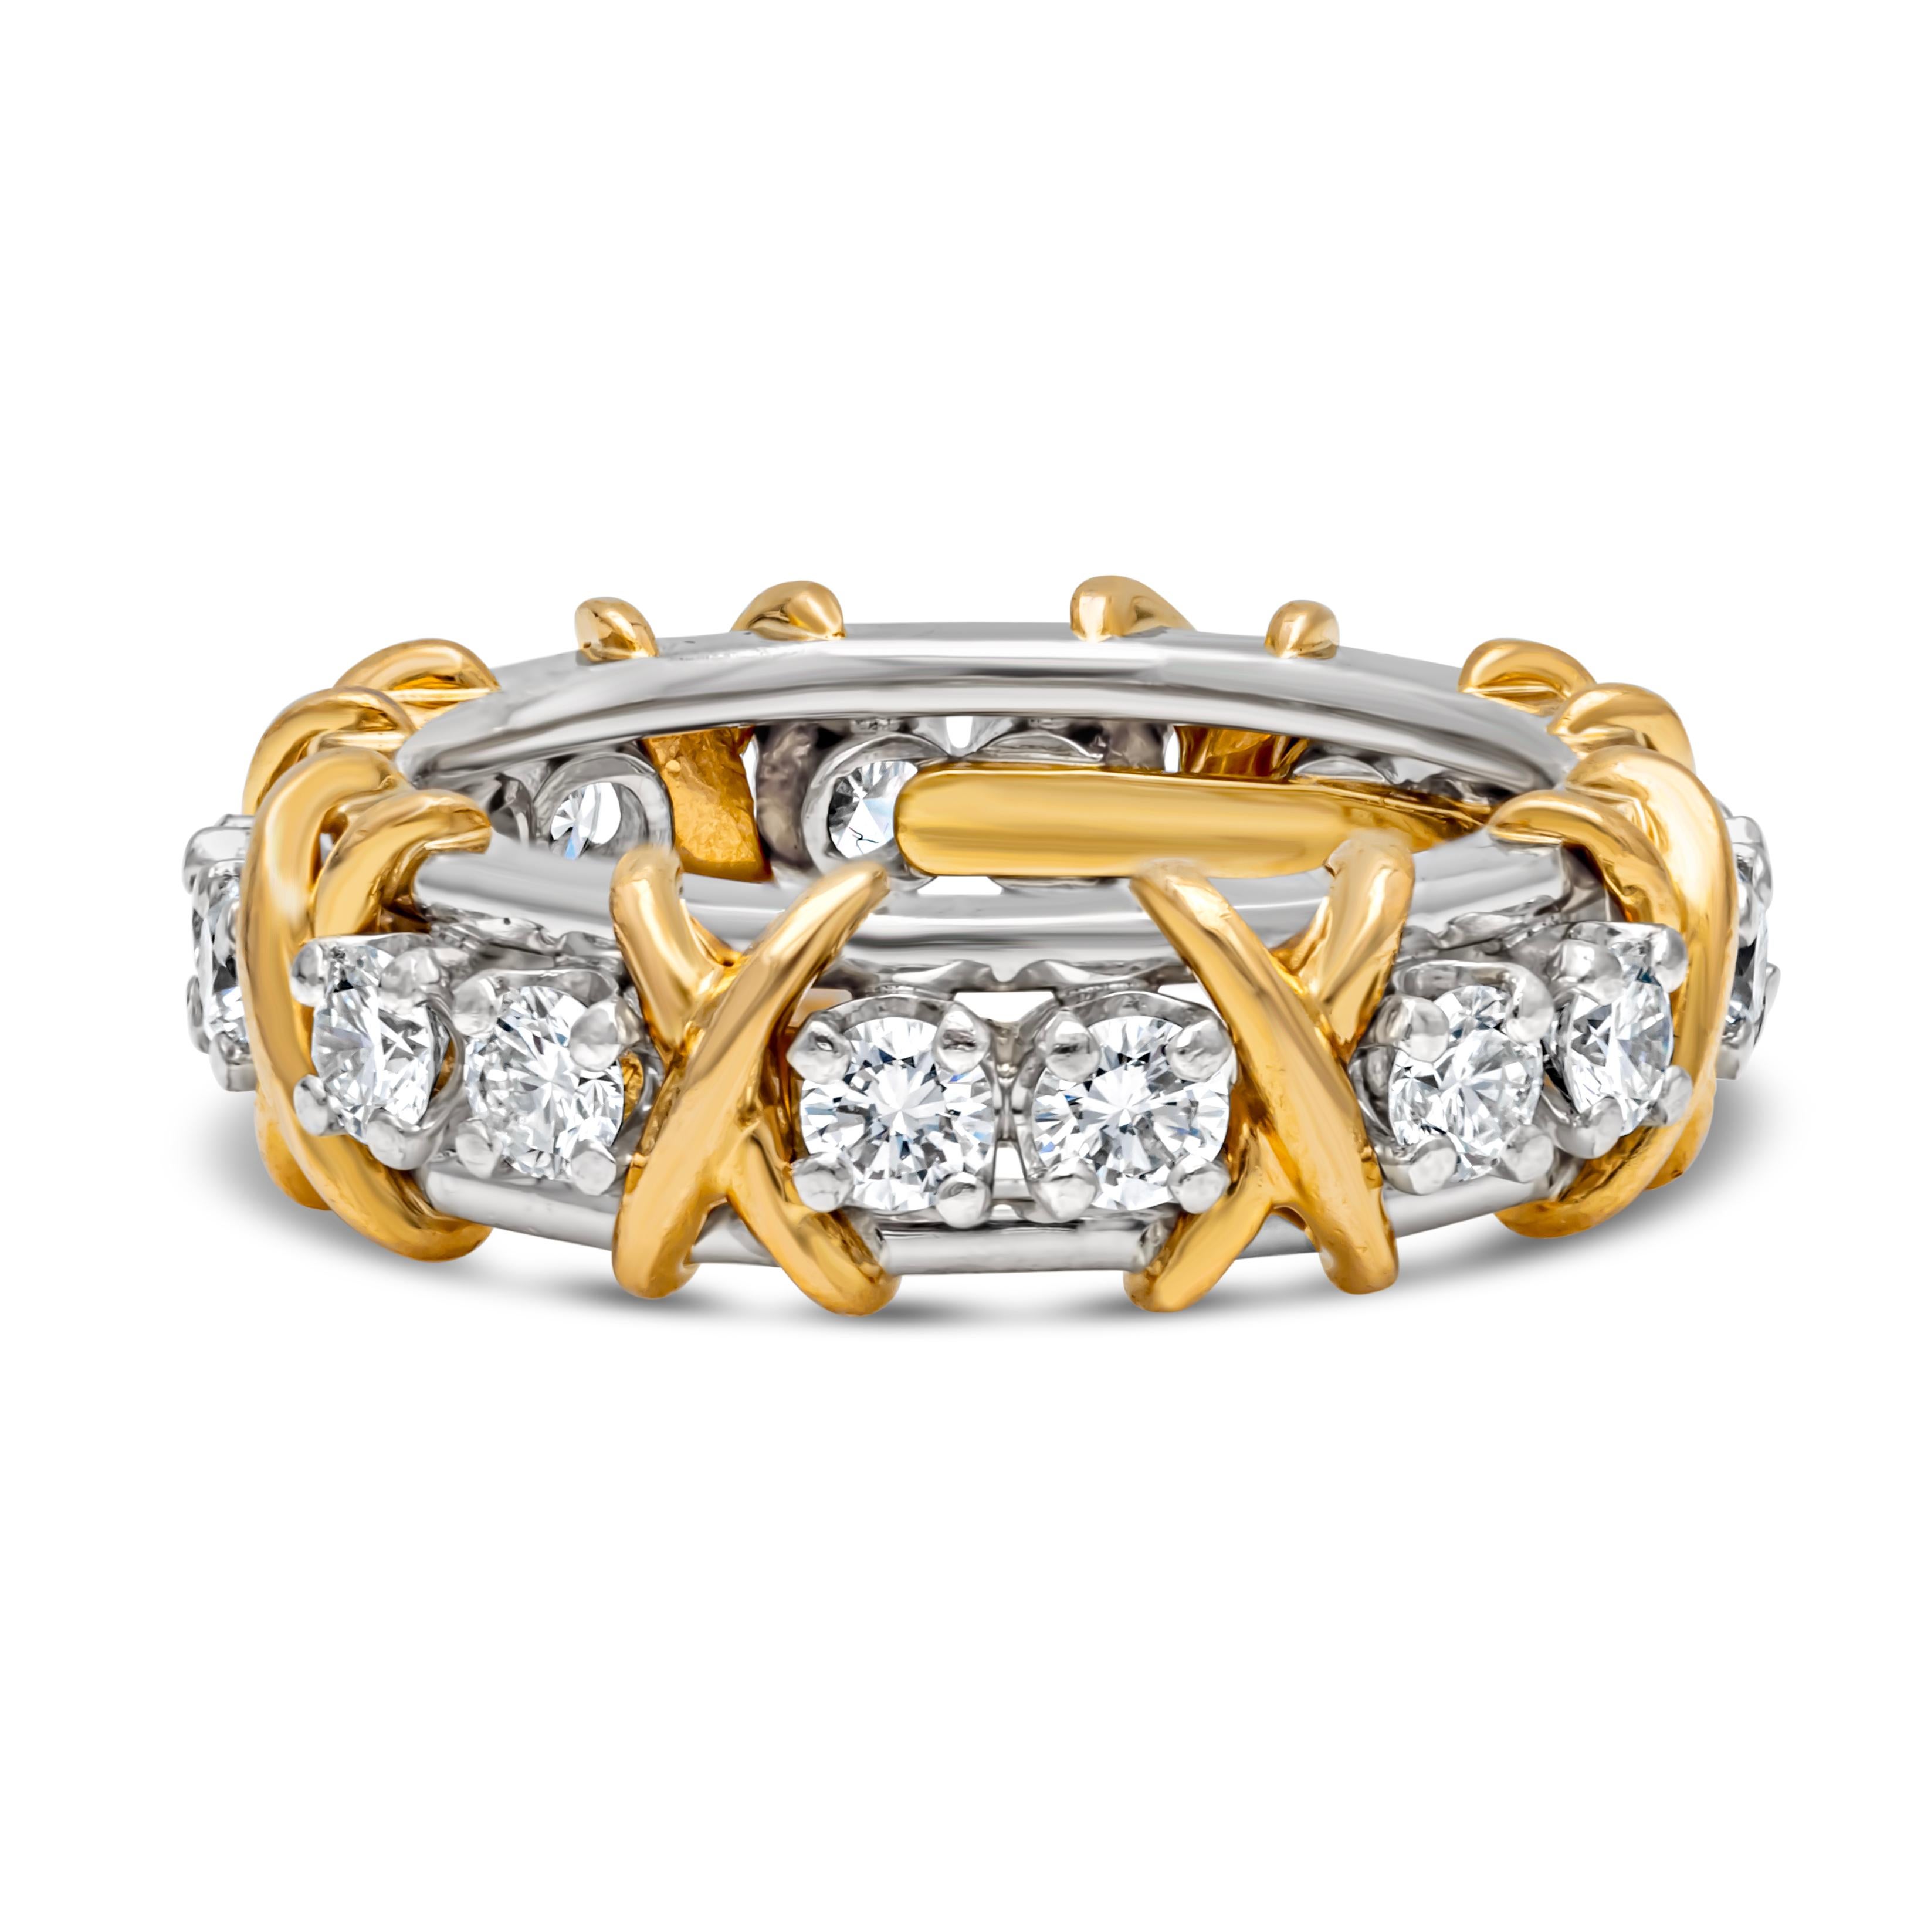 Signed by Tiffany & Co., a beautiful and elegant eternity band showcasing 1.14 carats total round diamond, set in a four prong setting. Eternity set in an open gallery setting and finely made with Platinum band and 18K Yellow Gold 